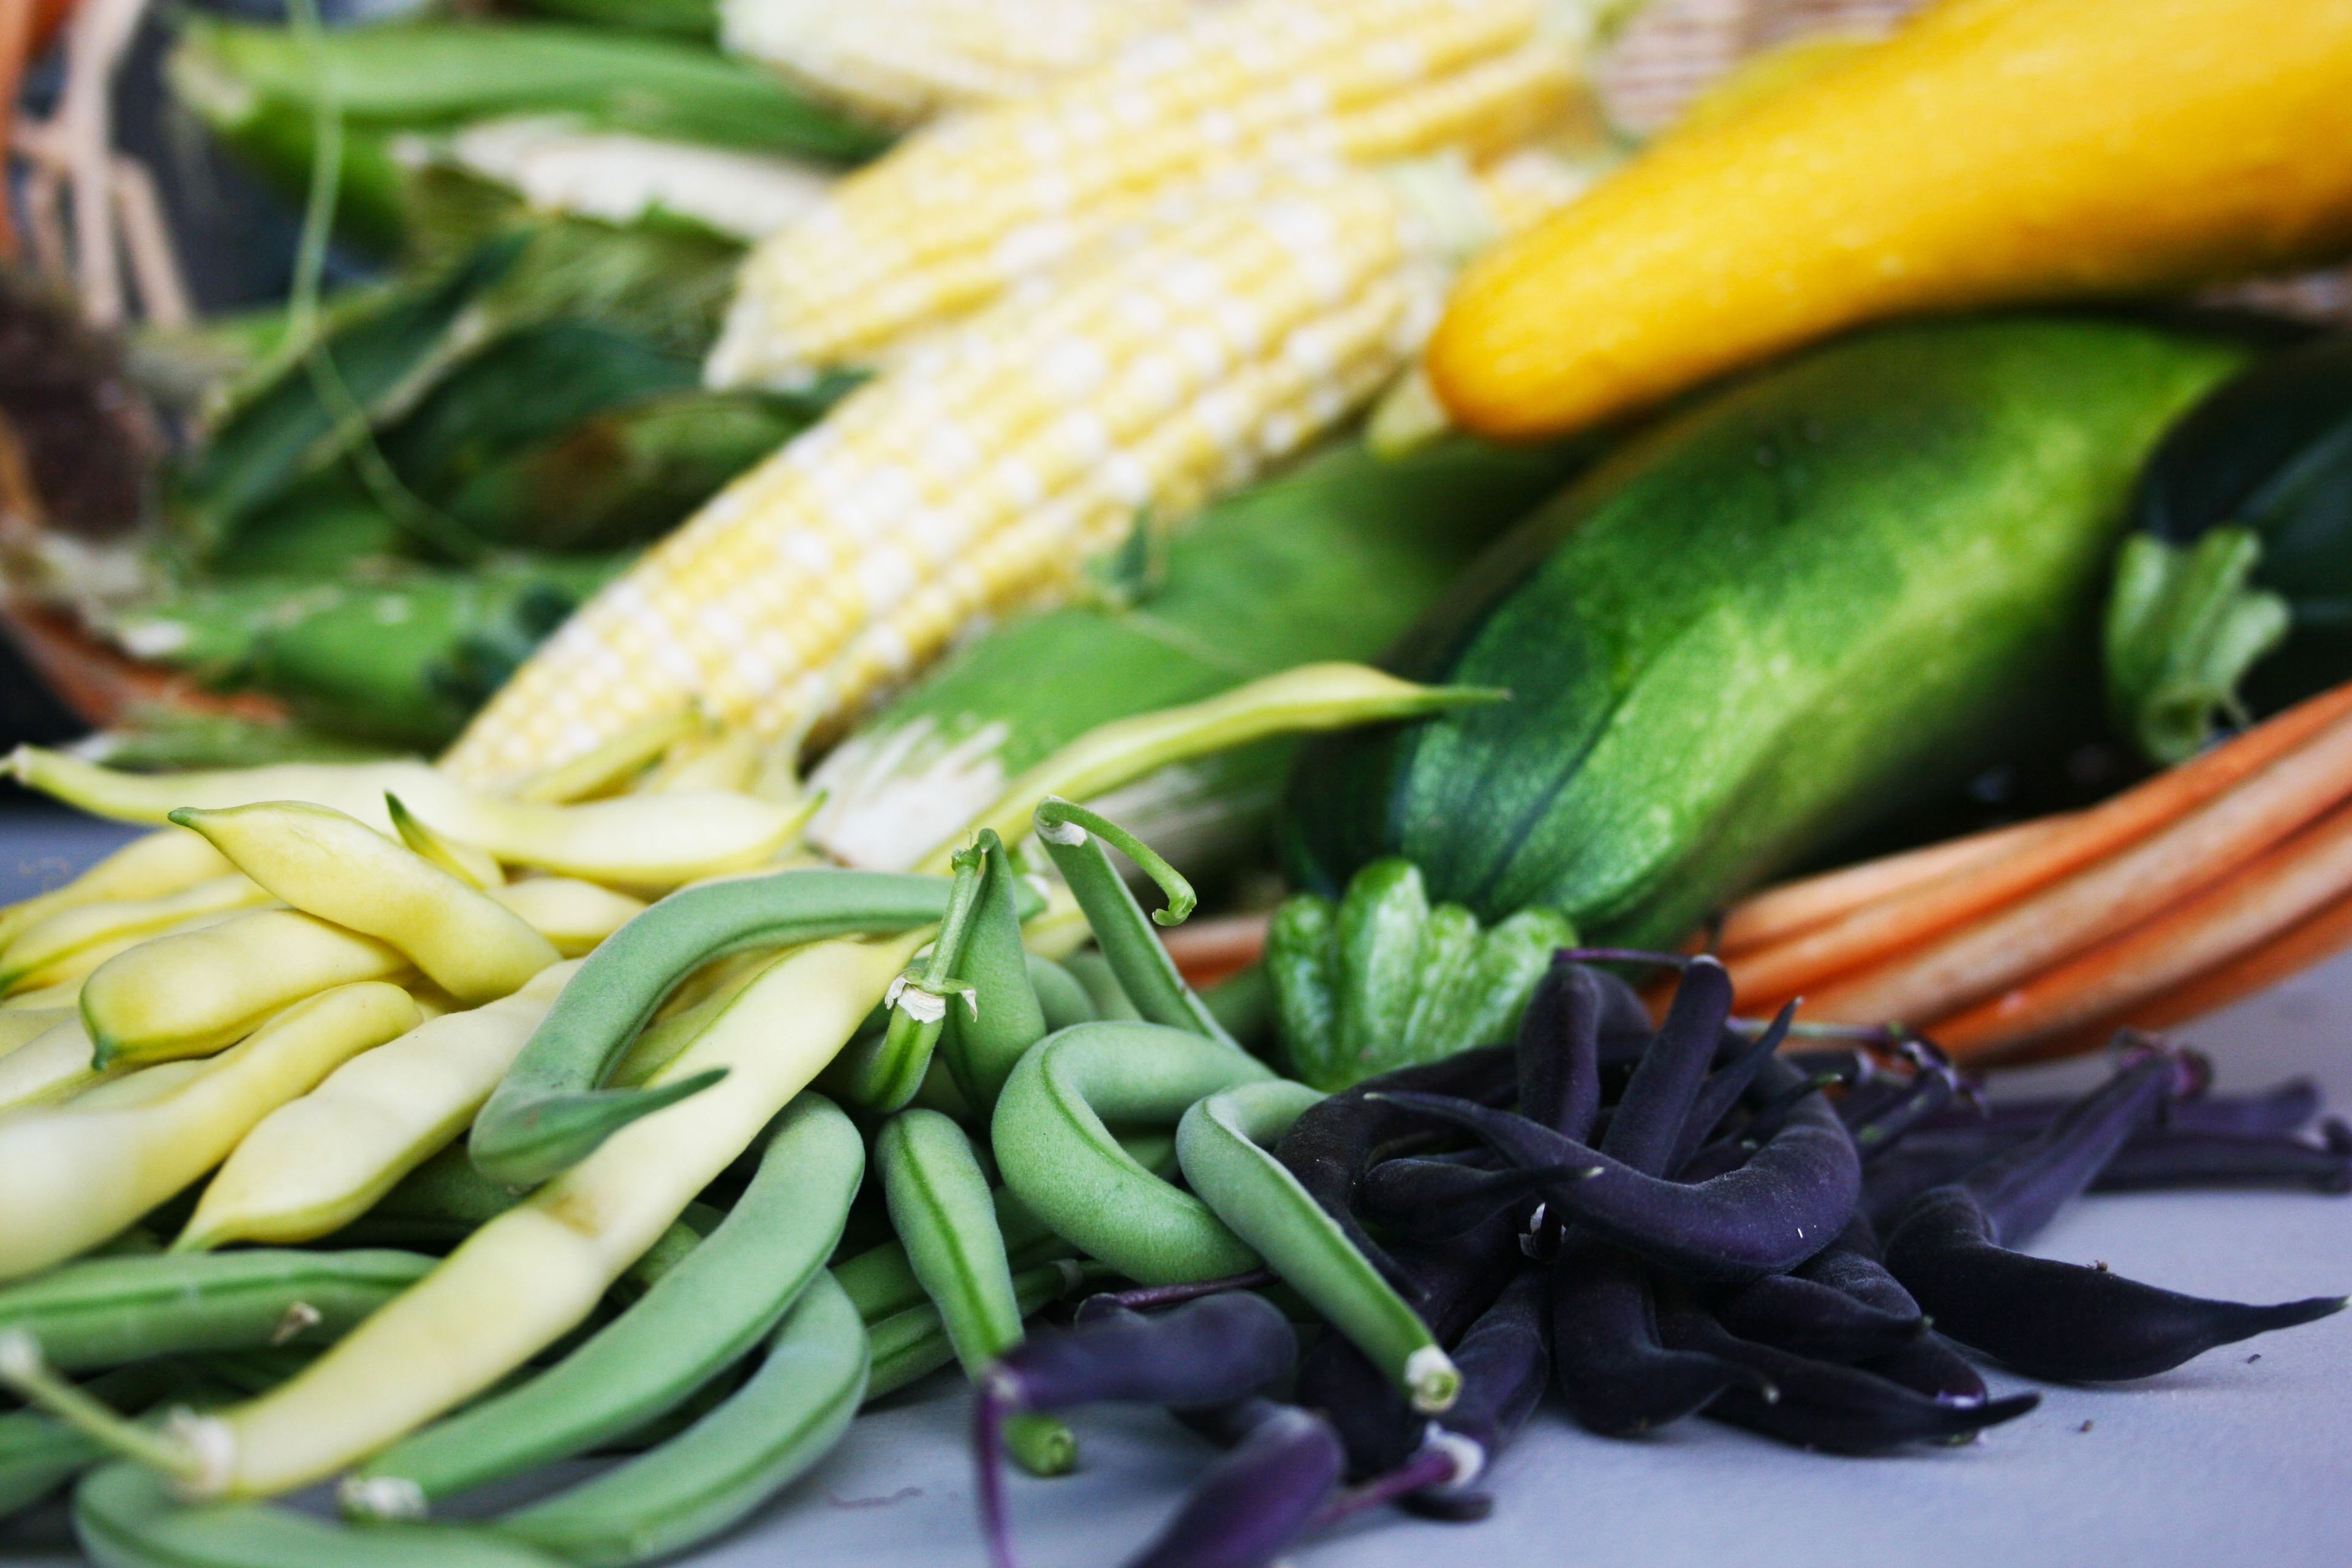 A mix of peas, corn, squash, and other vegetables.